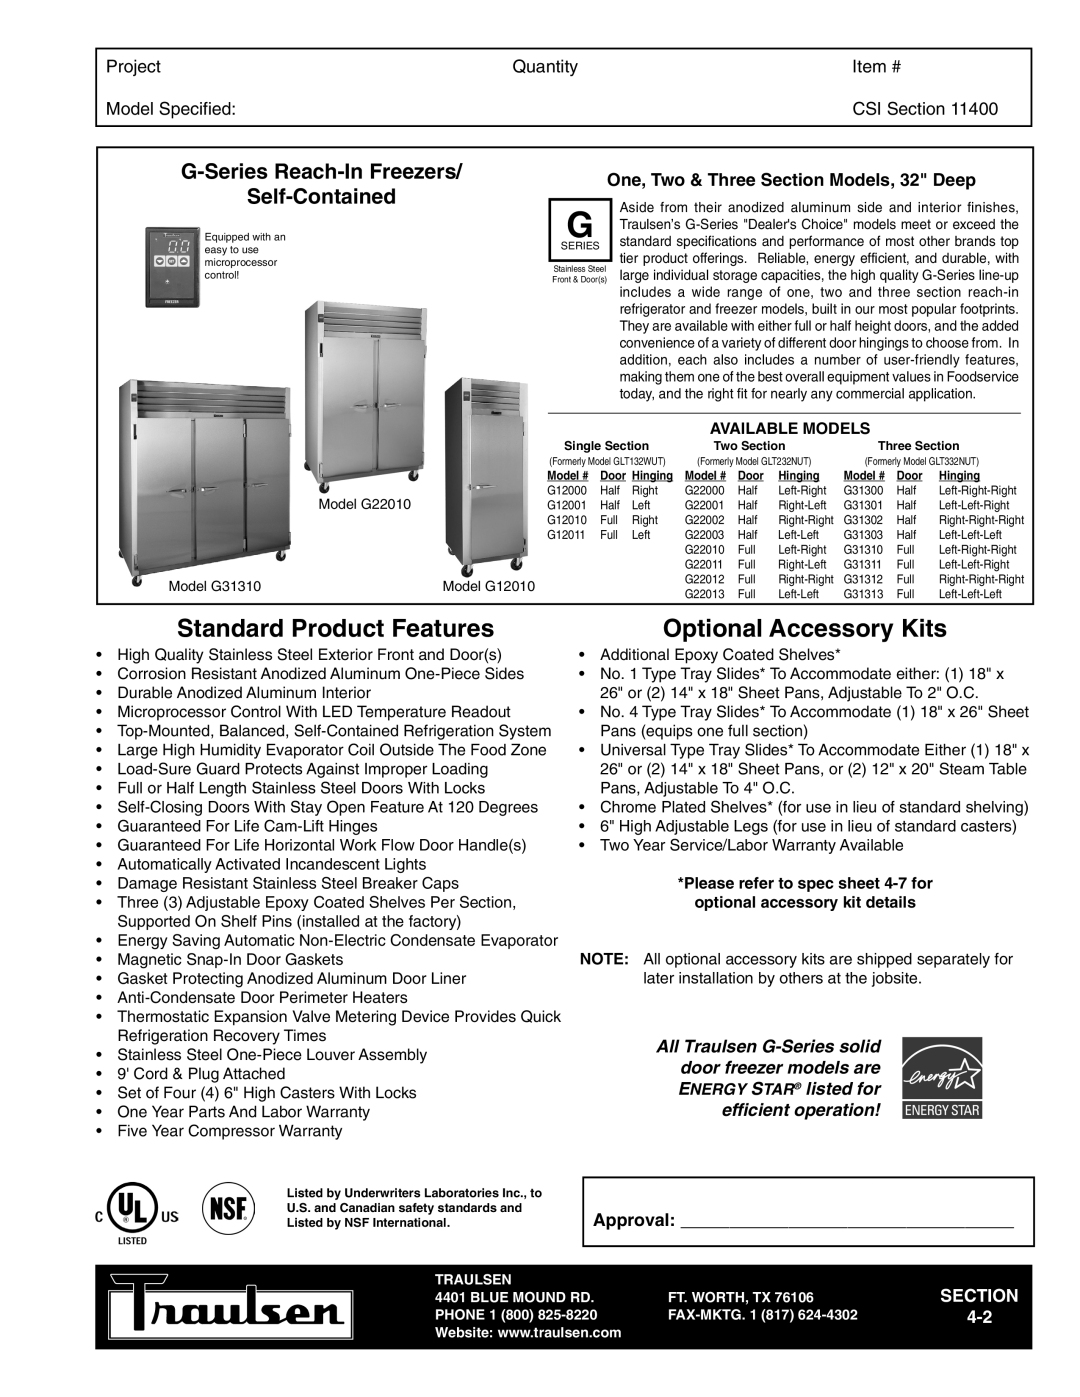 Traulsen TR35788 warranty G-Series Reach-InFreezers, Self-Contained, Project, Quantity, Item #, Model Specified, Section 